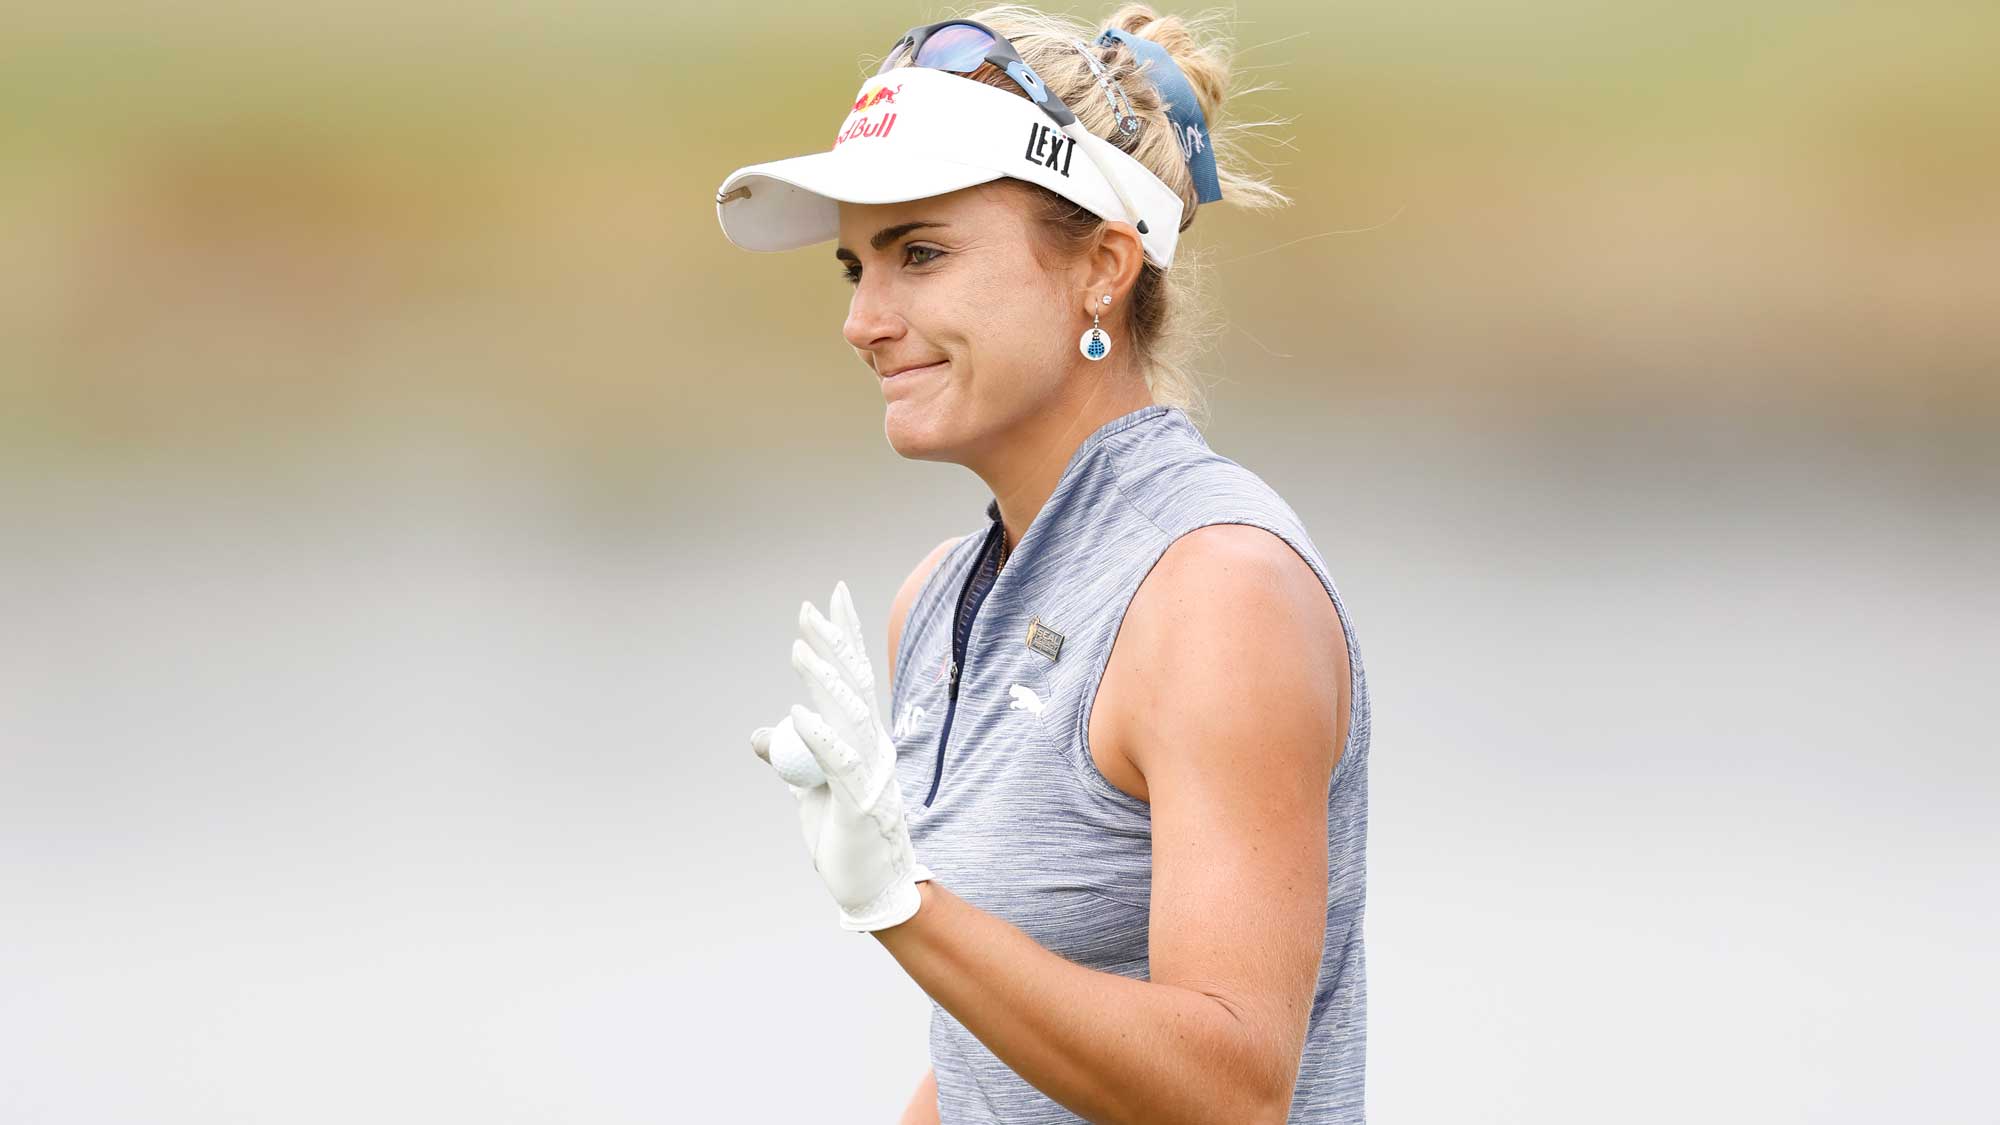 Lexi Thompson of the United States reacts after making a birdie putt on the 18th green during the first round of the CME Group Tour Championship